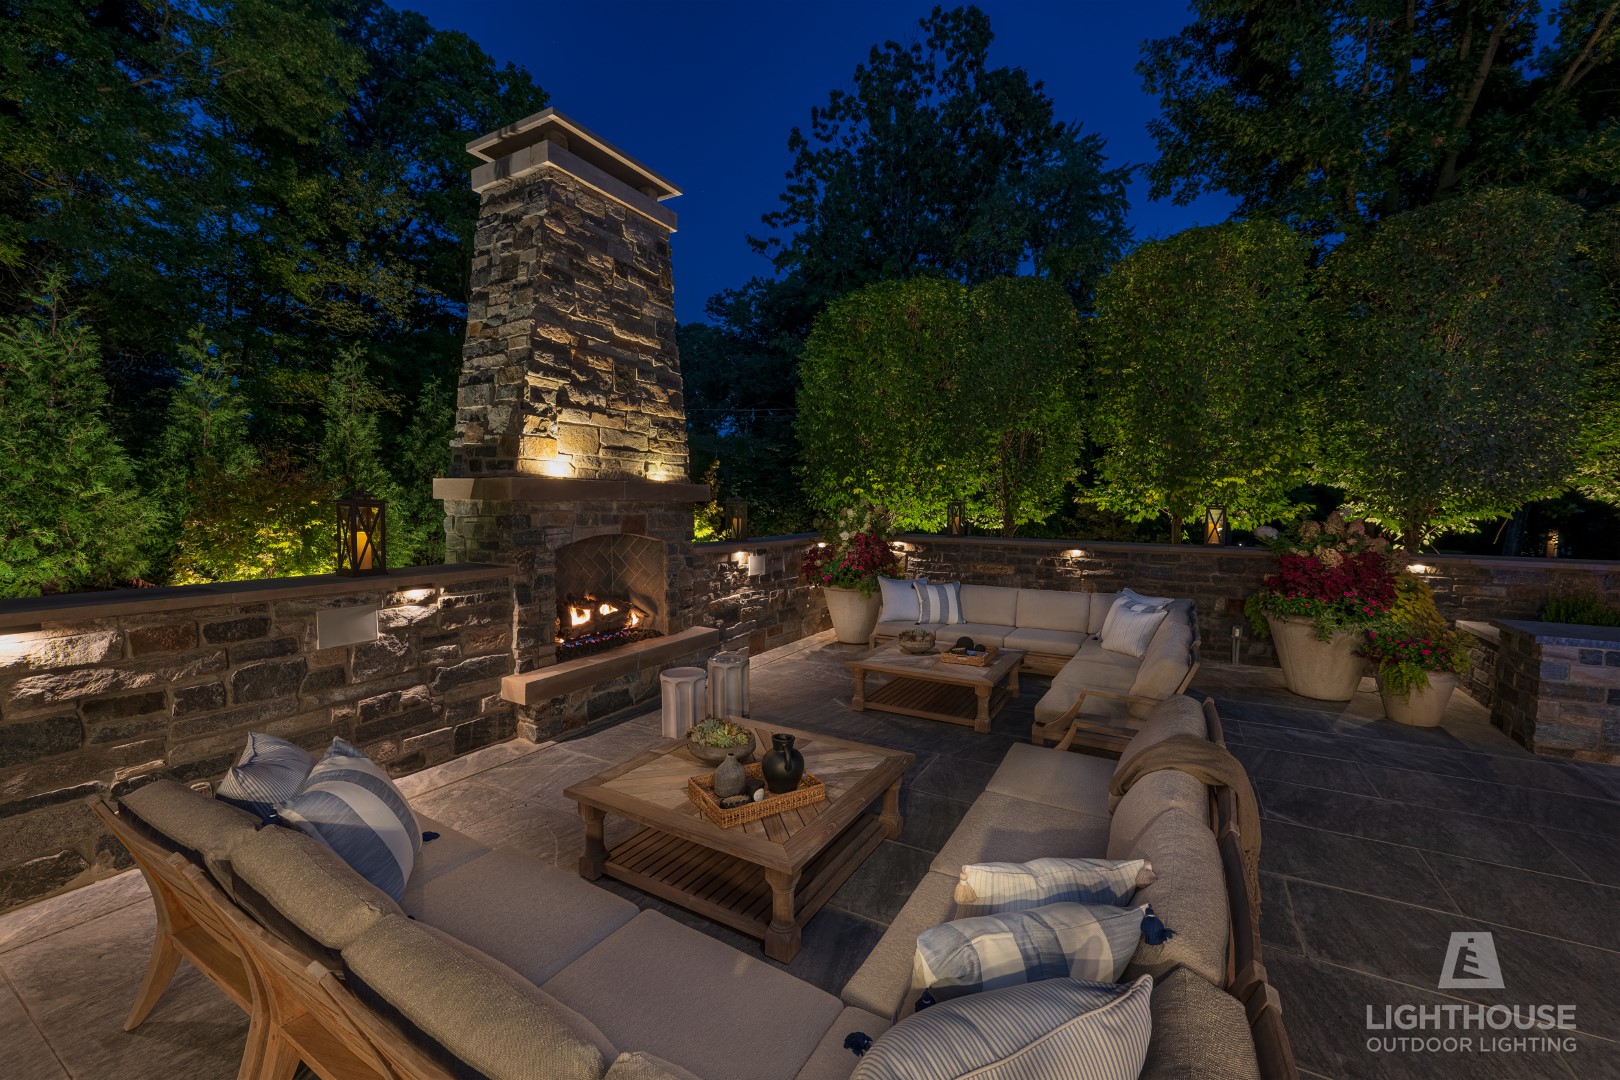 Outdoor Lighting Company in Westminster, CO